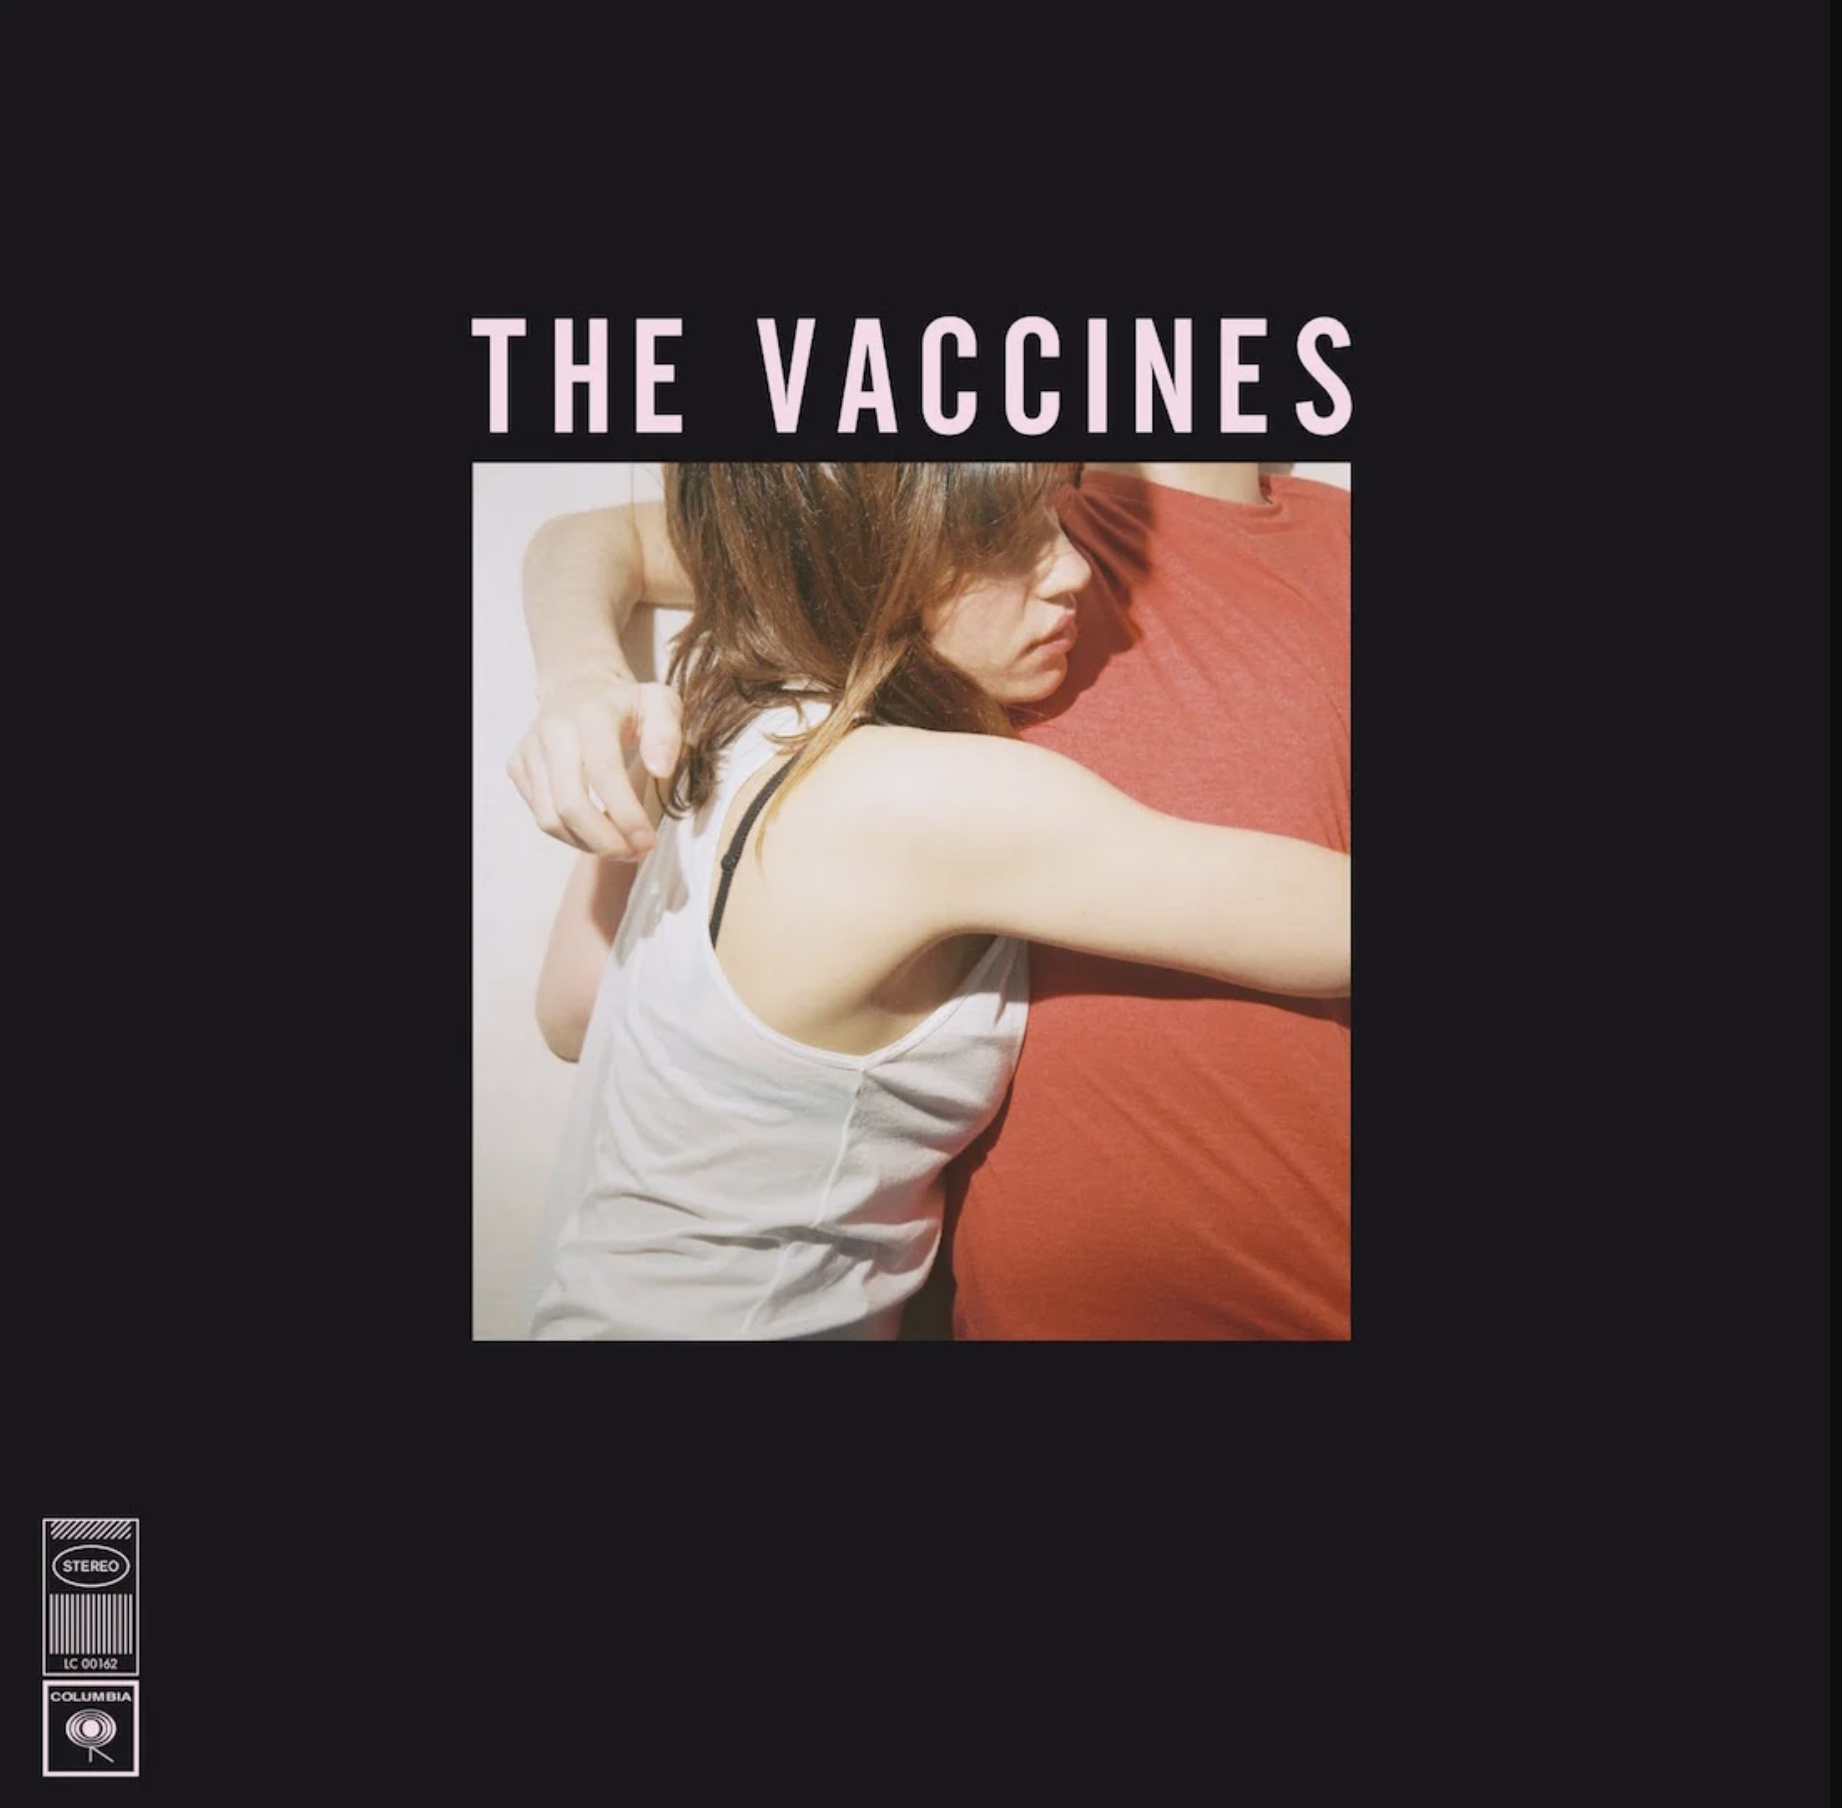 What Did You Expect from the Vaccines? - The Vaccines 